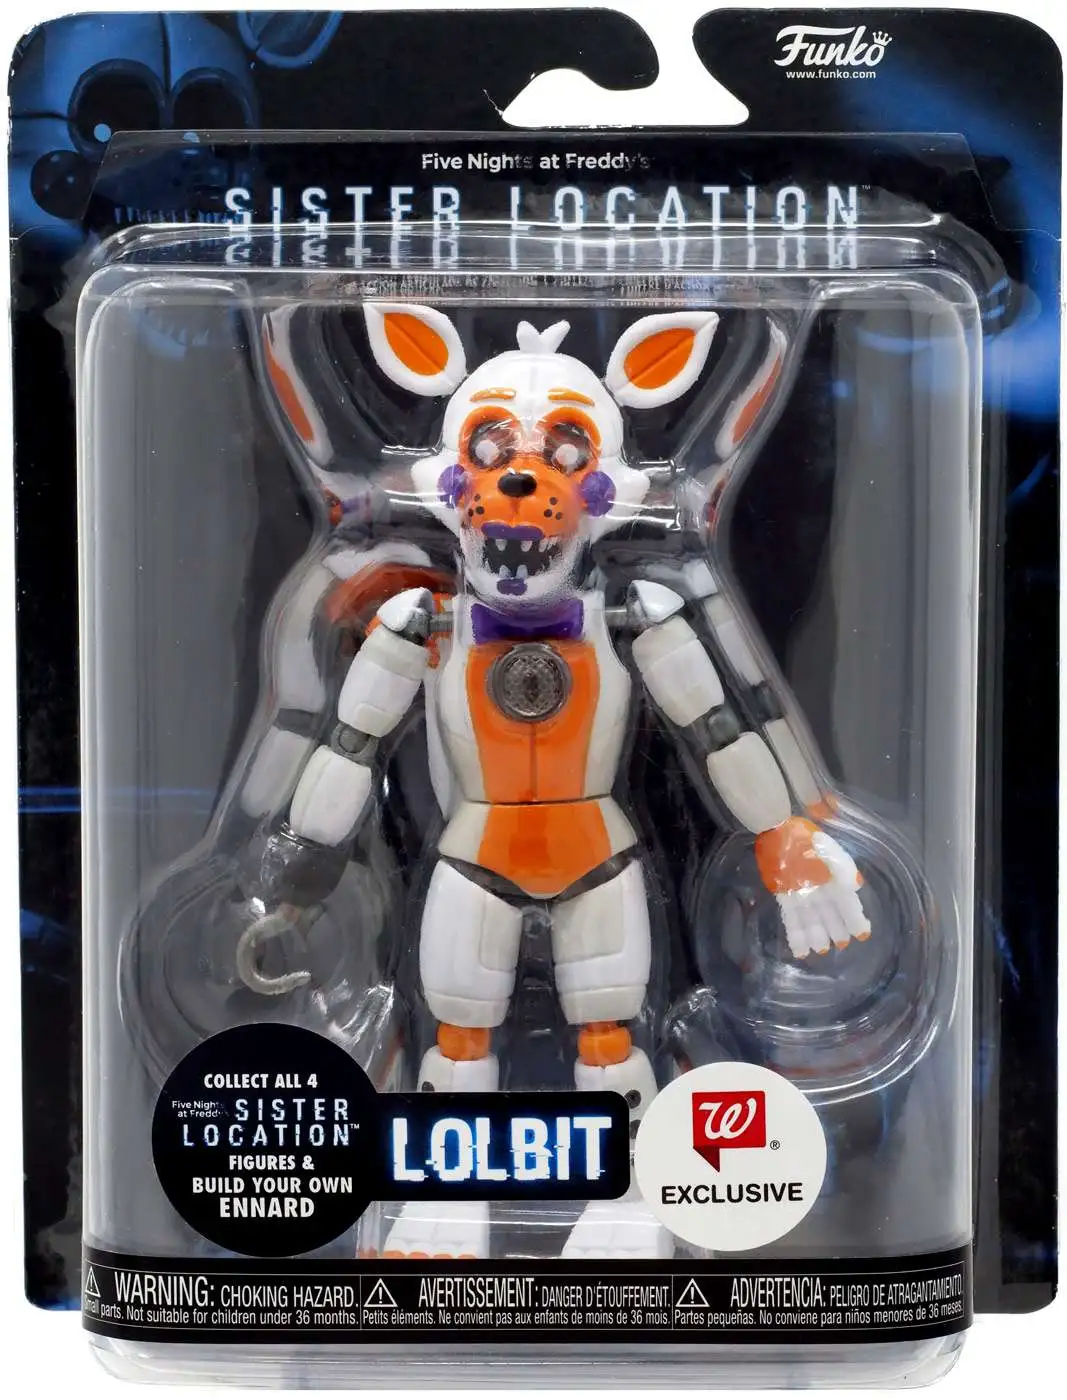 Funko Five Nights at Freddys Sister Location Lolbit Exclusive Action Figure  - ToyWiz